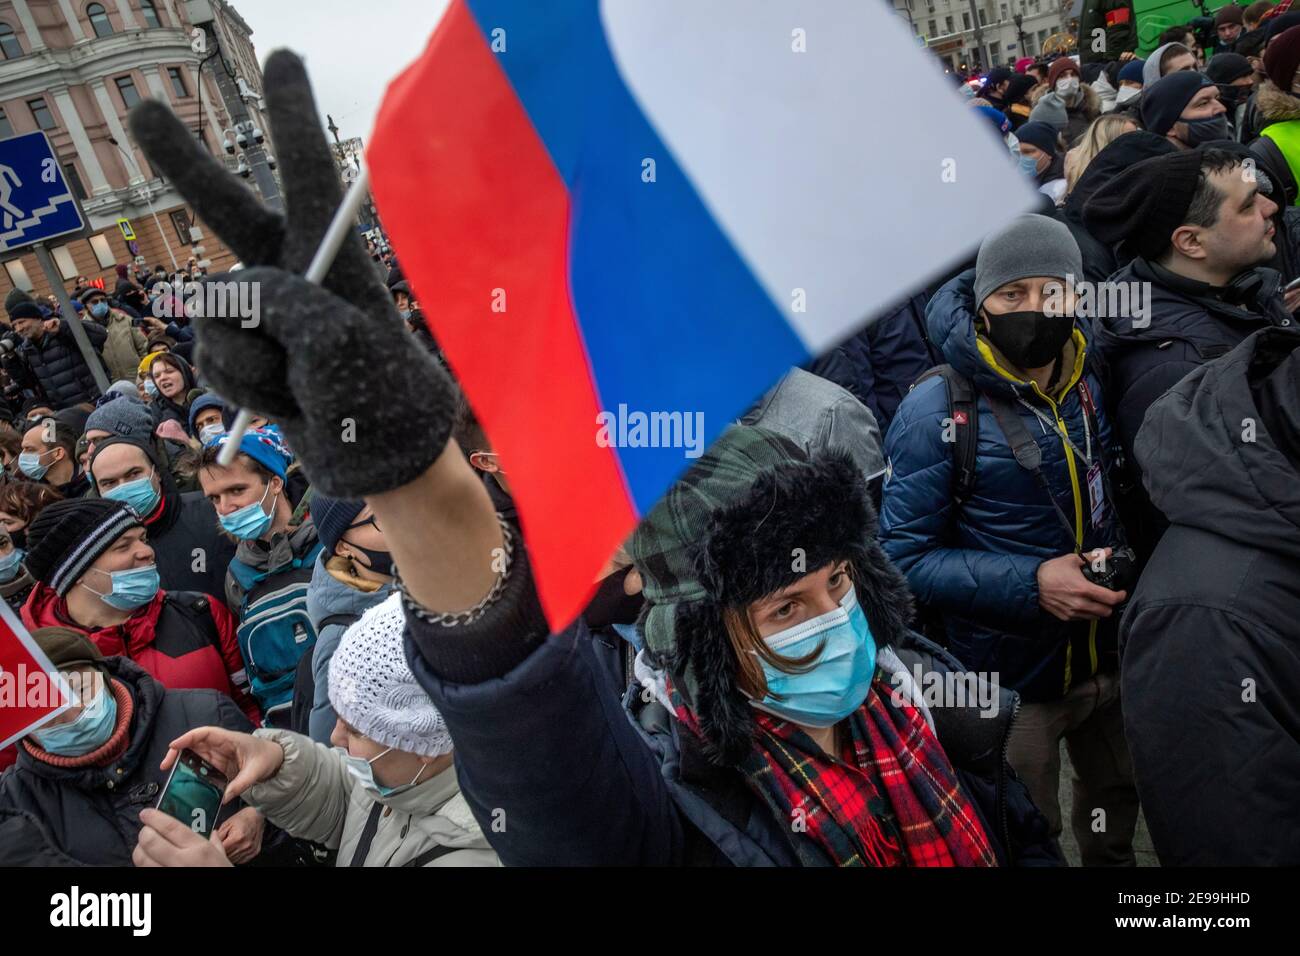 Moscow, Russia. 23rd of January, 2021 People take part in an unauthorized rally in support of Russian opposition leader Alexei Navalny at Pushkinskaya square in the central Moscow, Russia Stock Photo